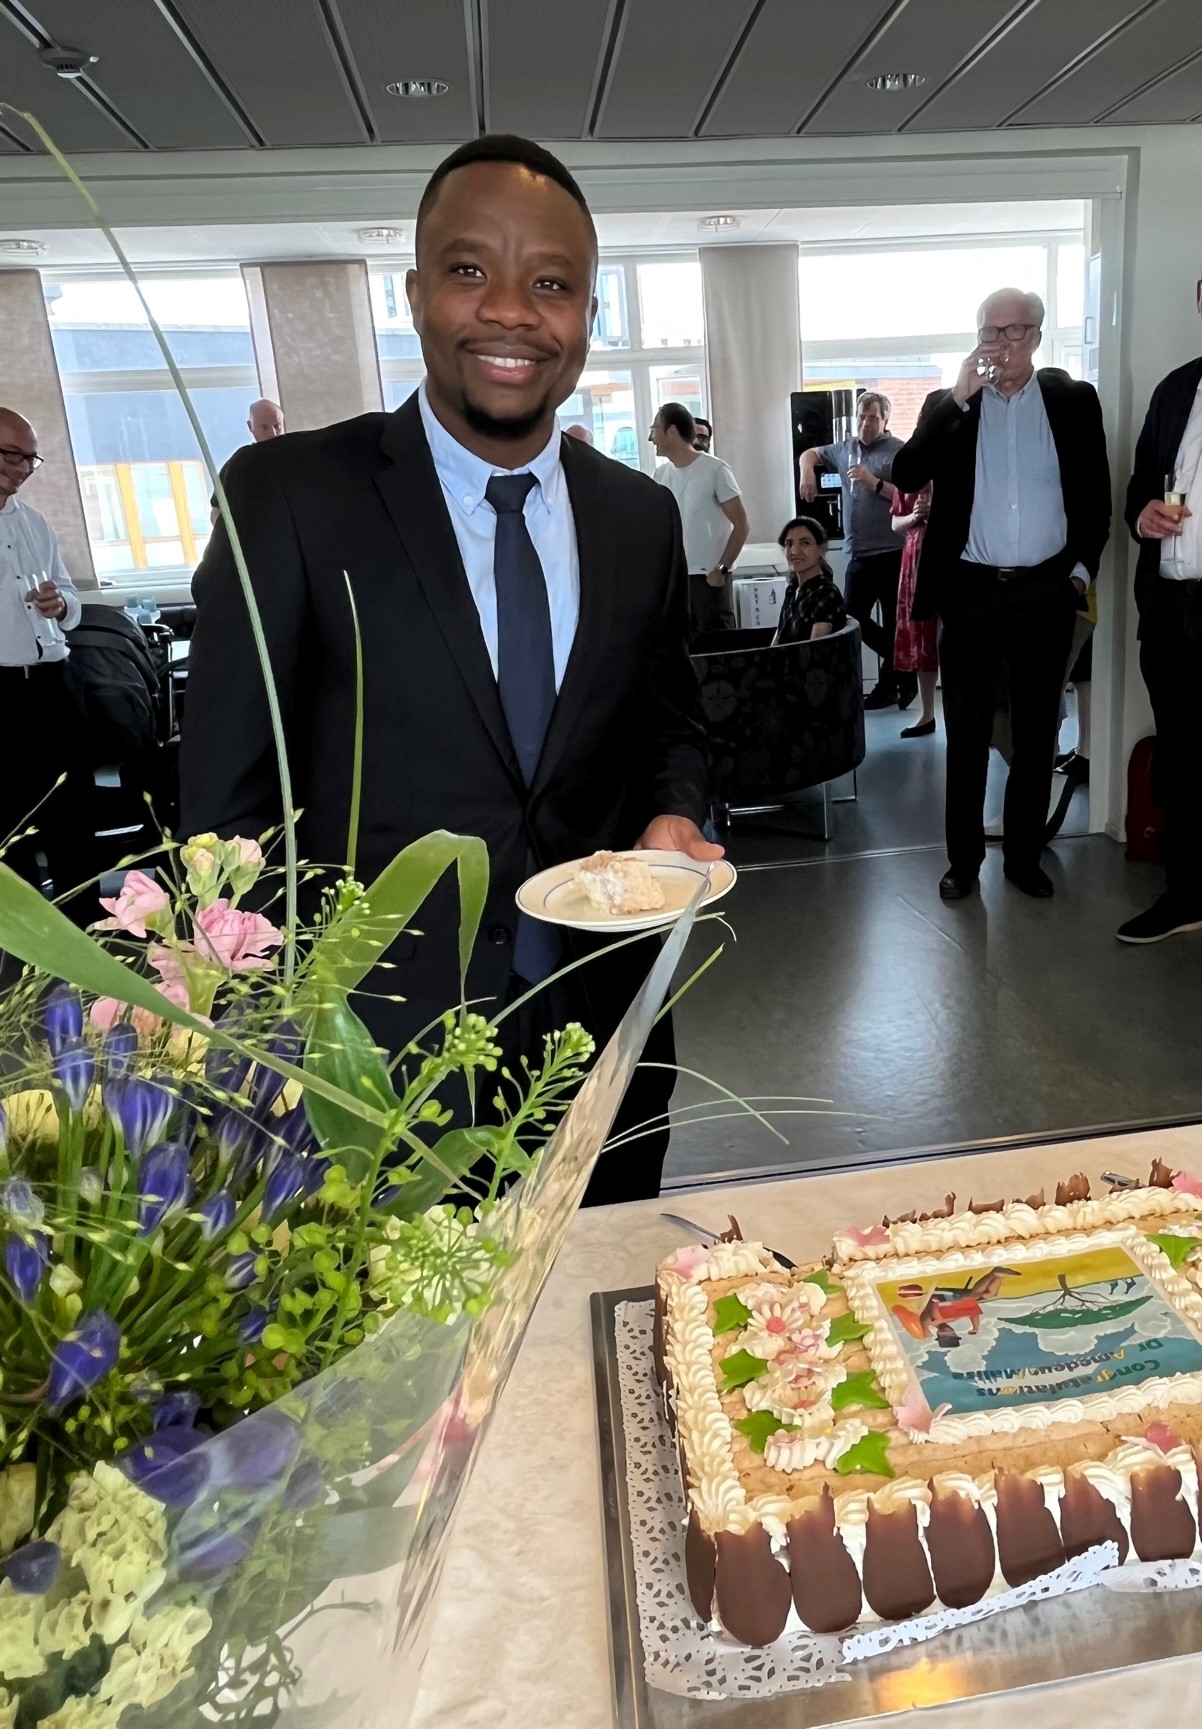 Amedeus Malisa with flowers and cake